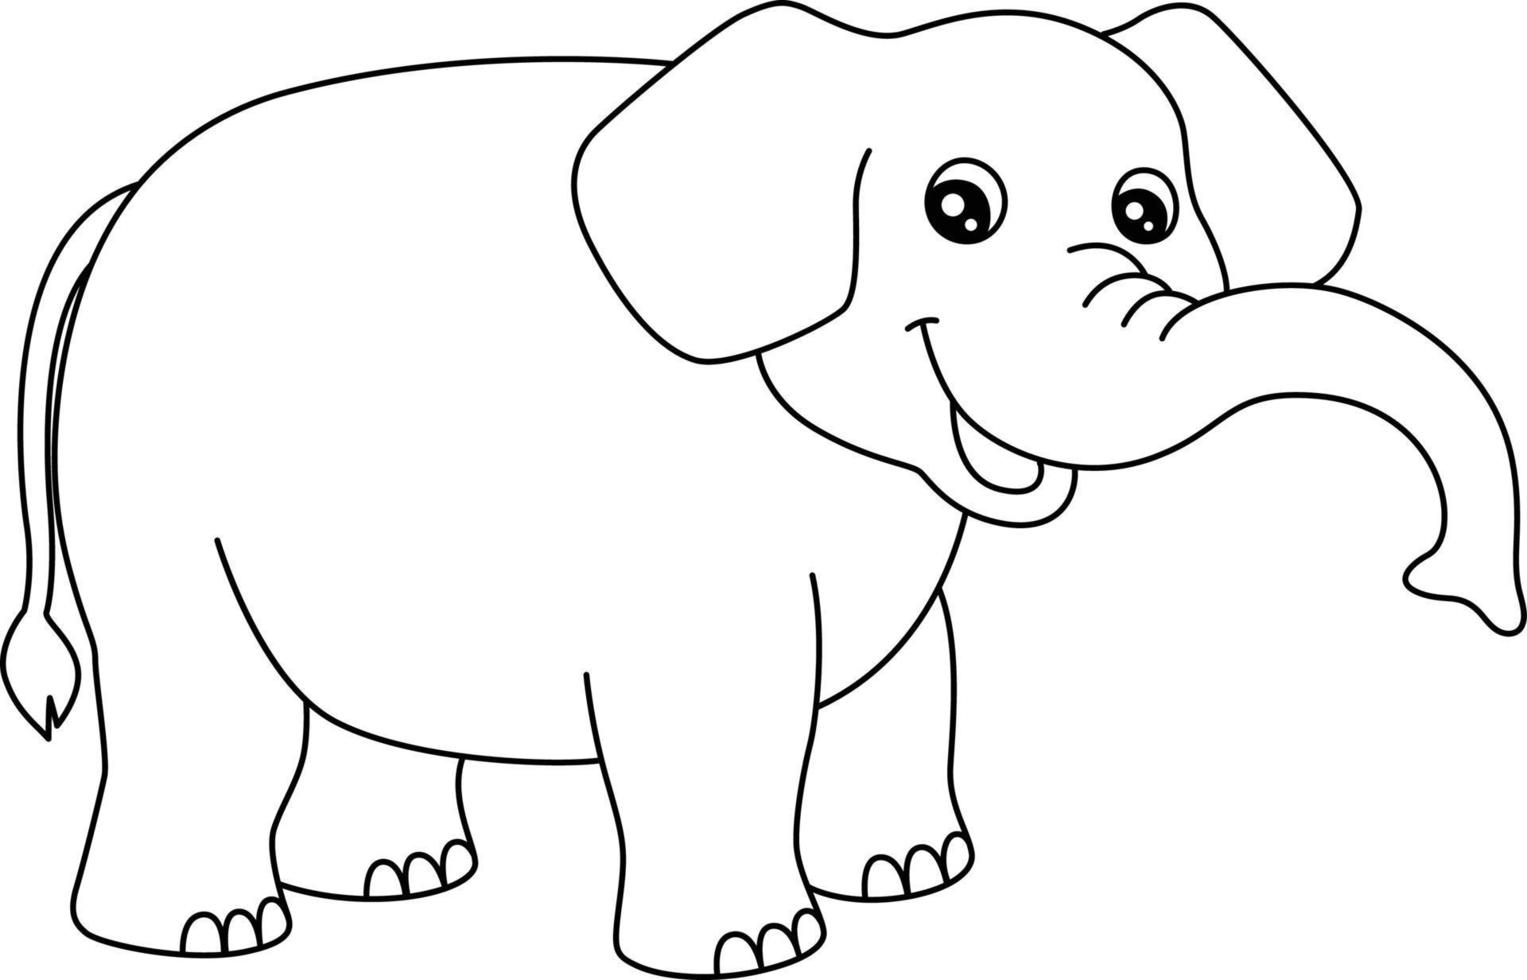 Elephant Coloring Page Isolated for Kids vector